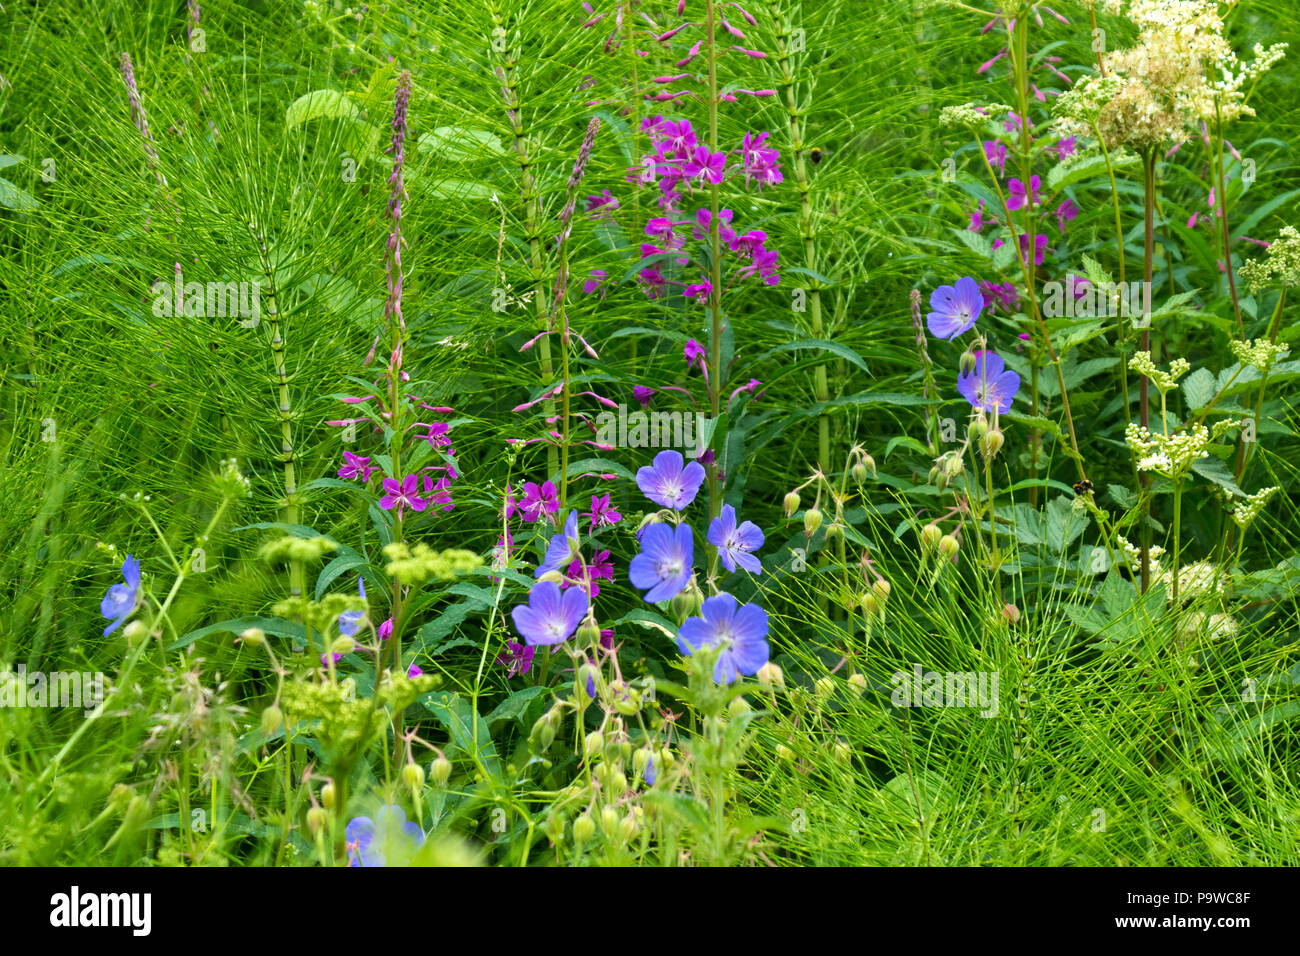 Great willow herb and periwinkle flowers with horse tail fern Stock Photo